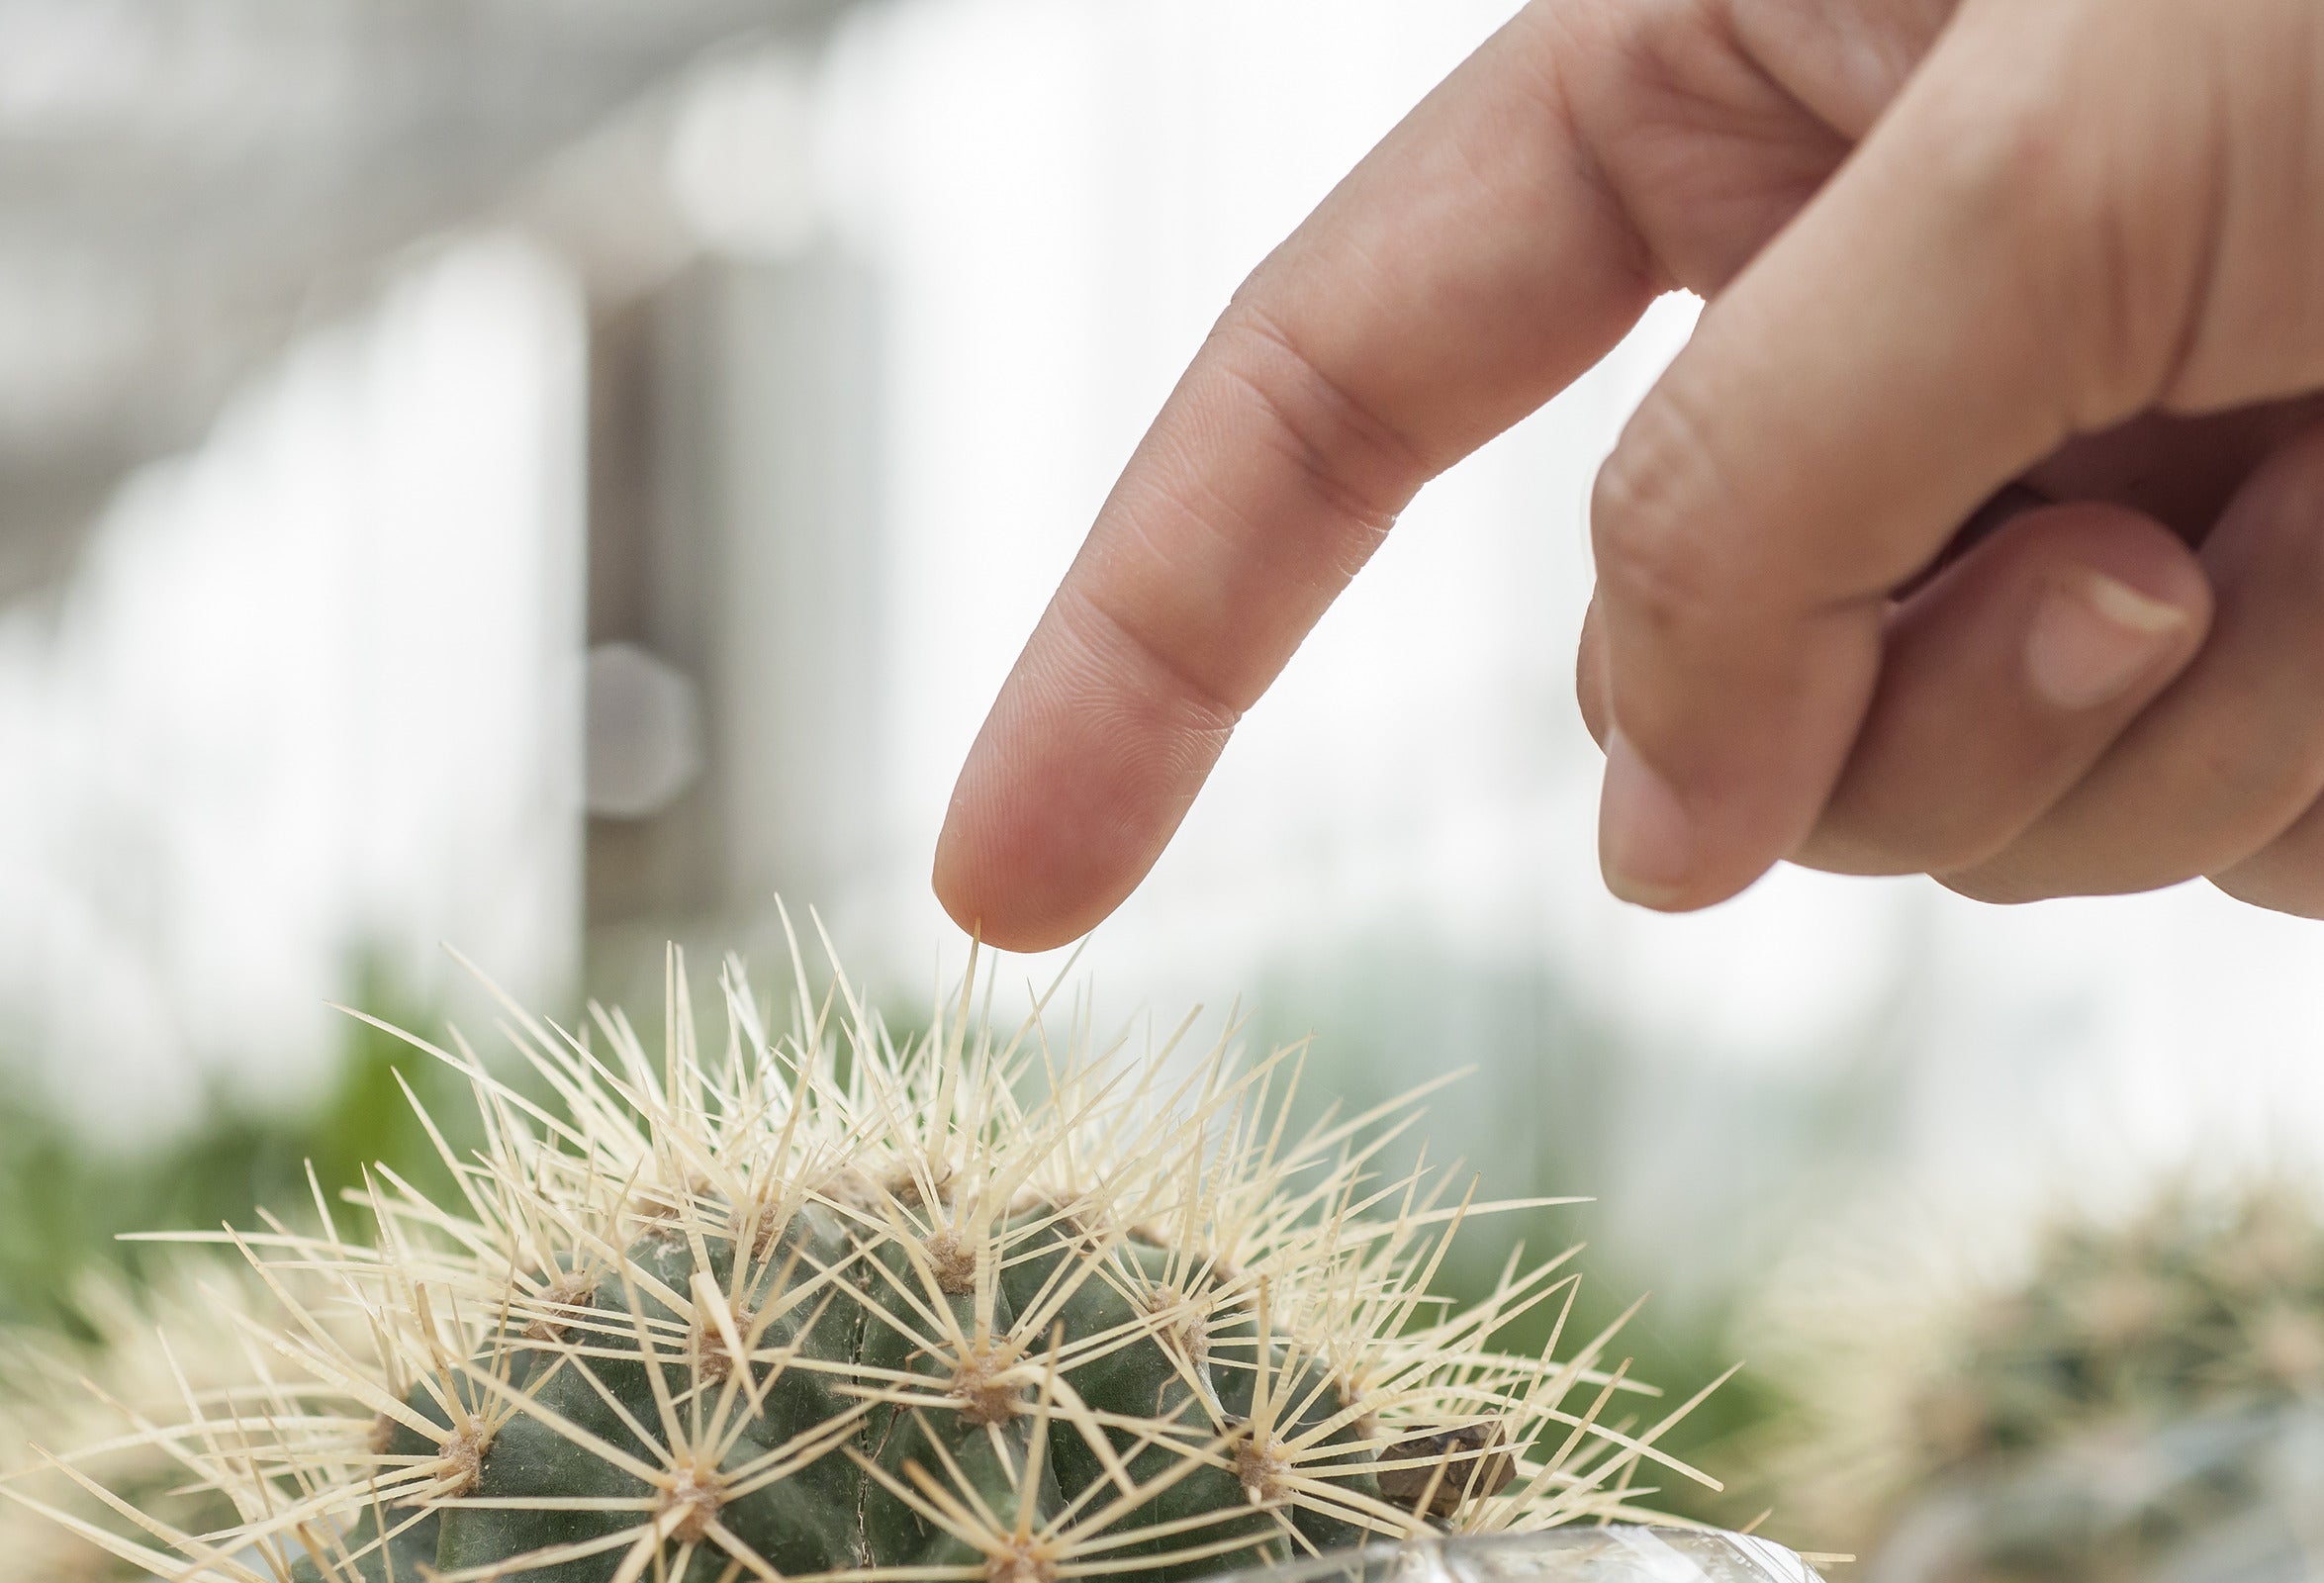 The 5 Steps To Heal A Cactus Wound